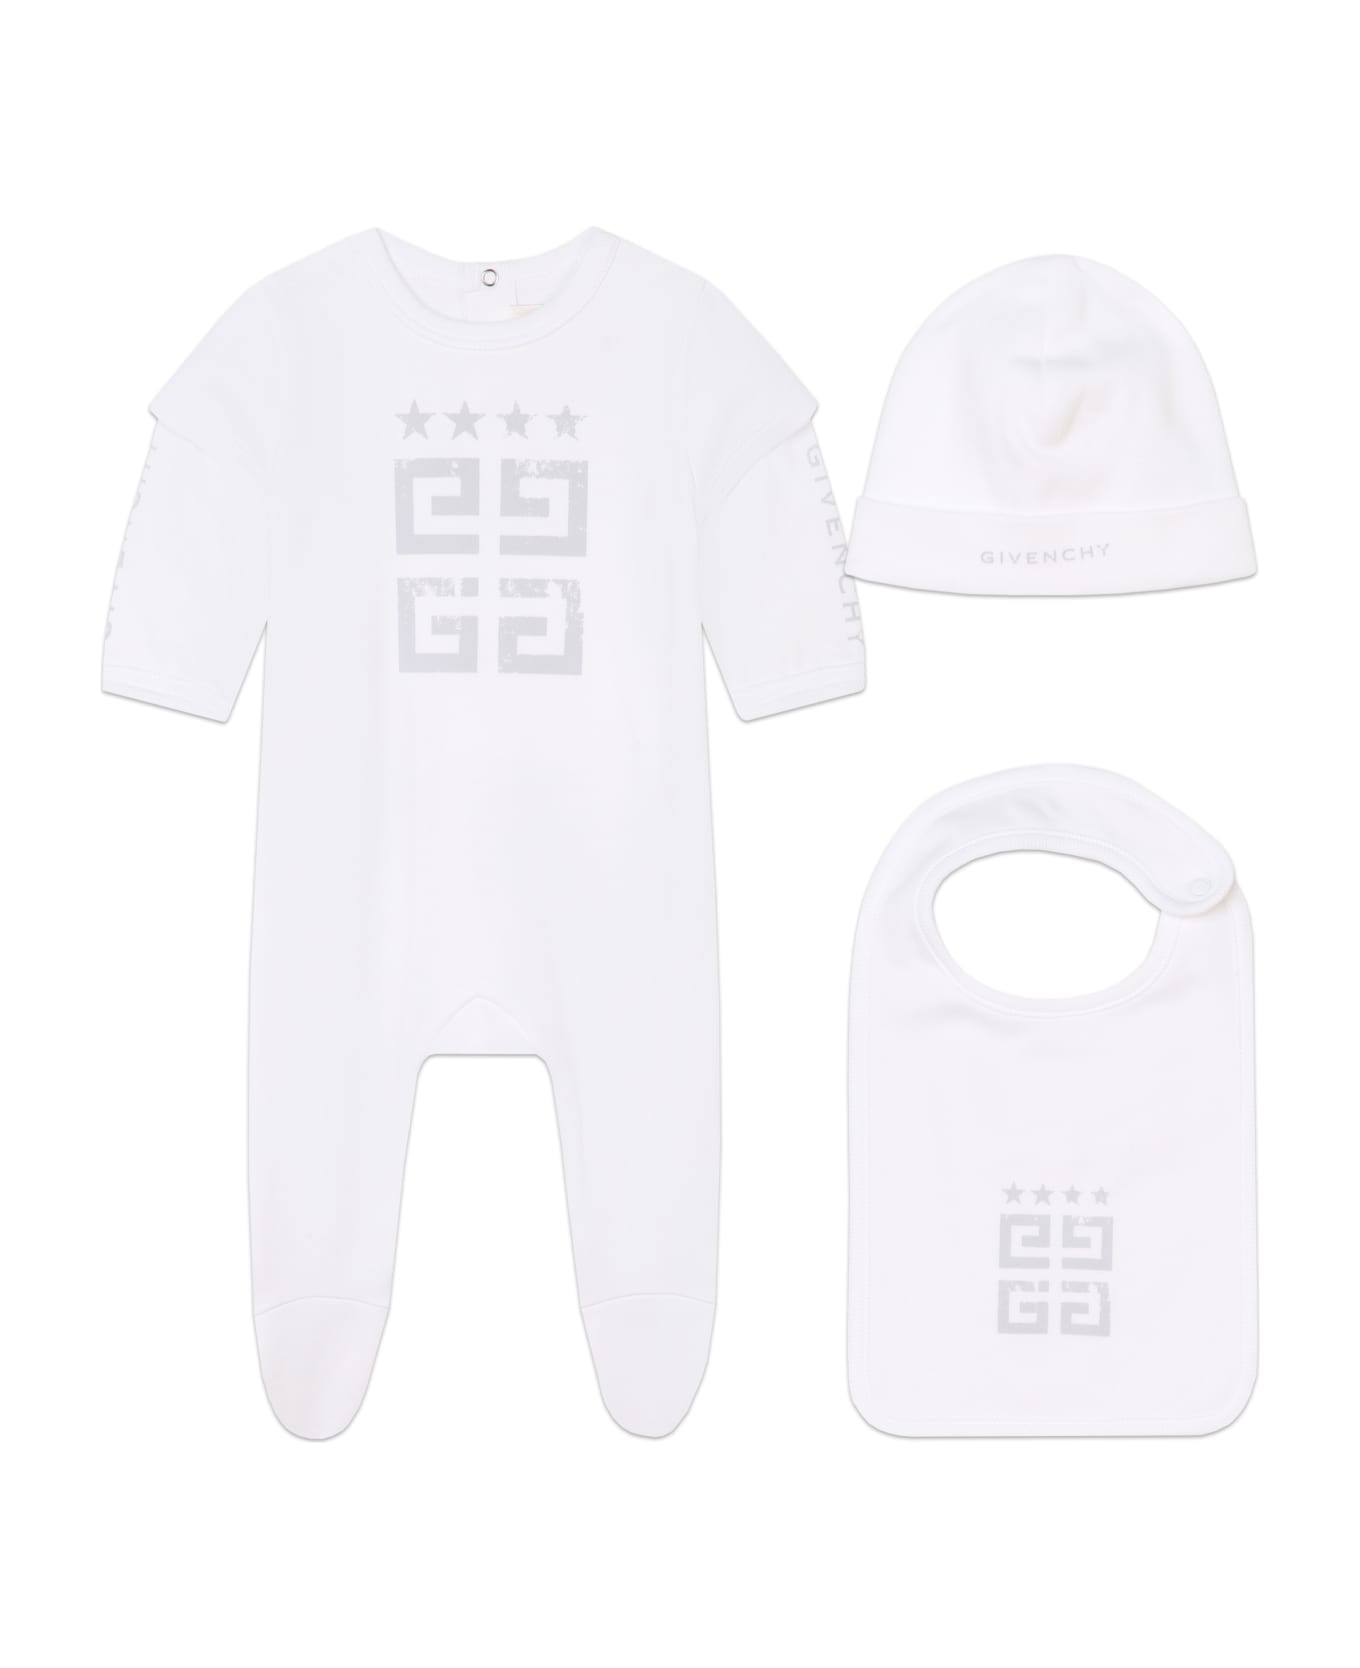 Givenchy 3-piece Baby Set With 4g Print - White ボディスーツ＆セットアップ